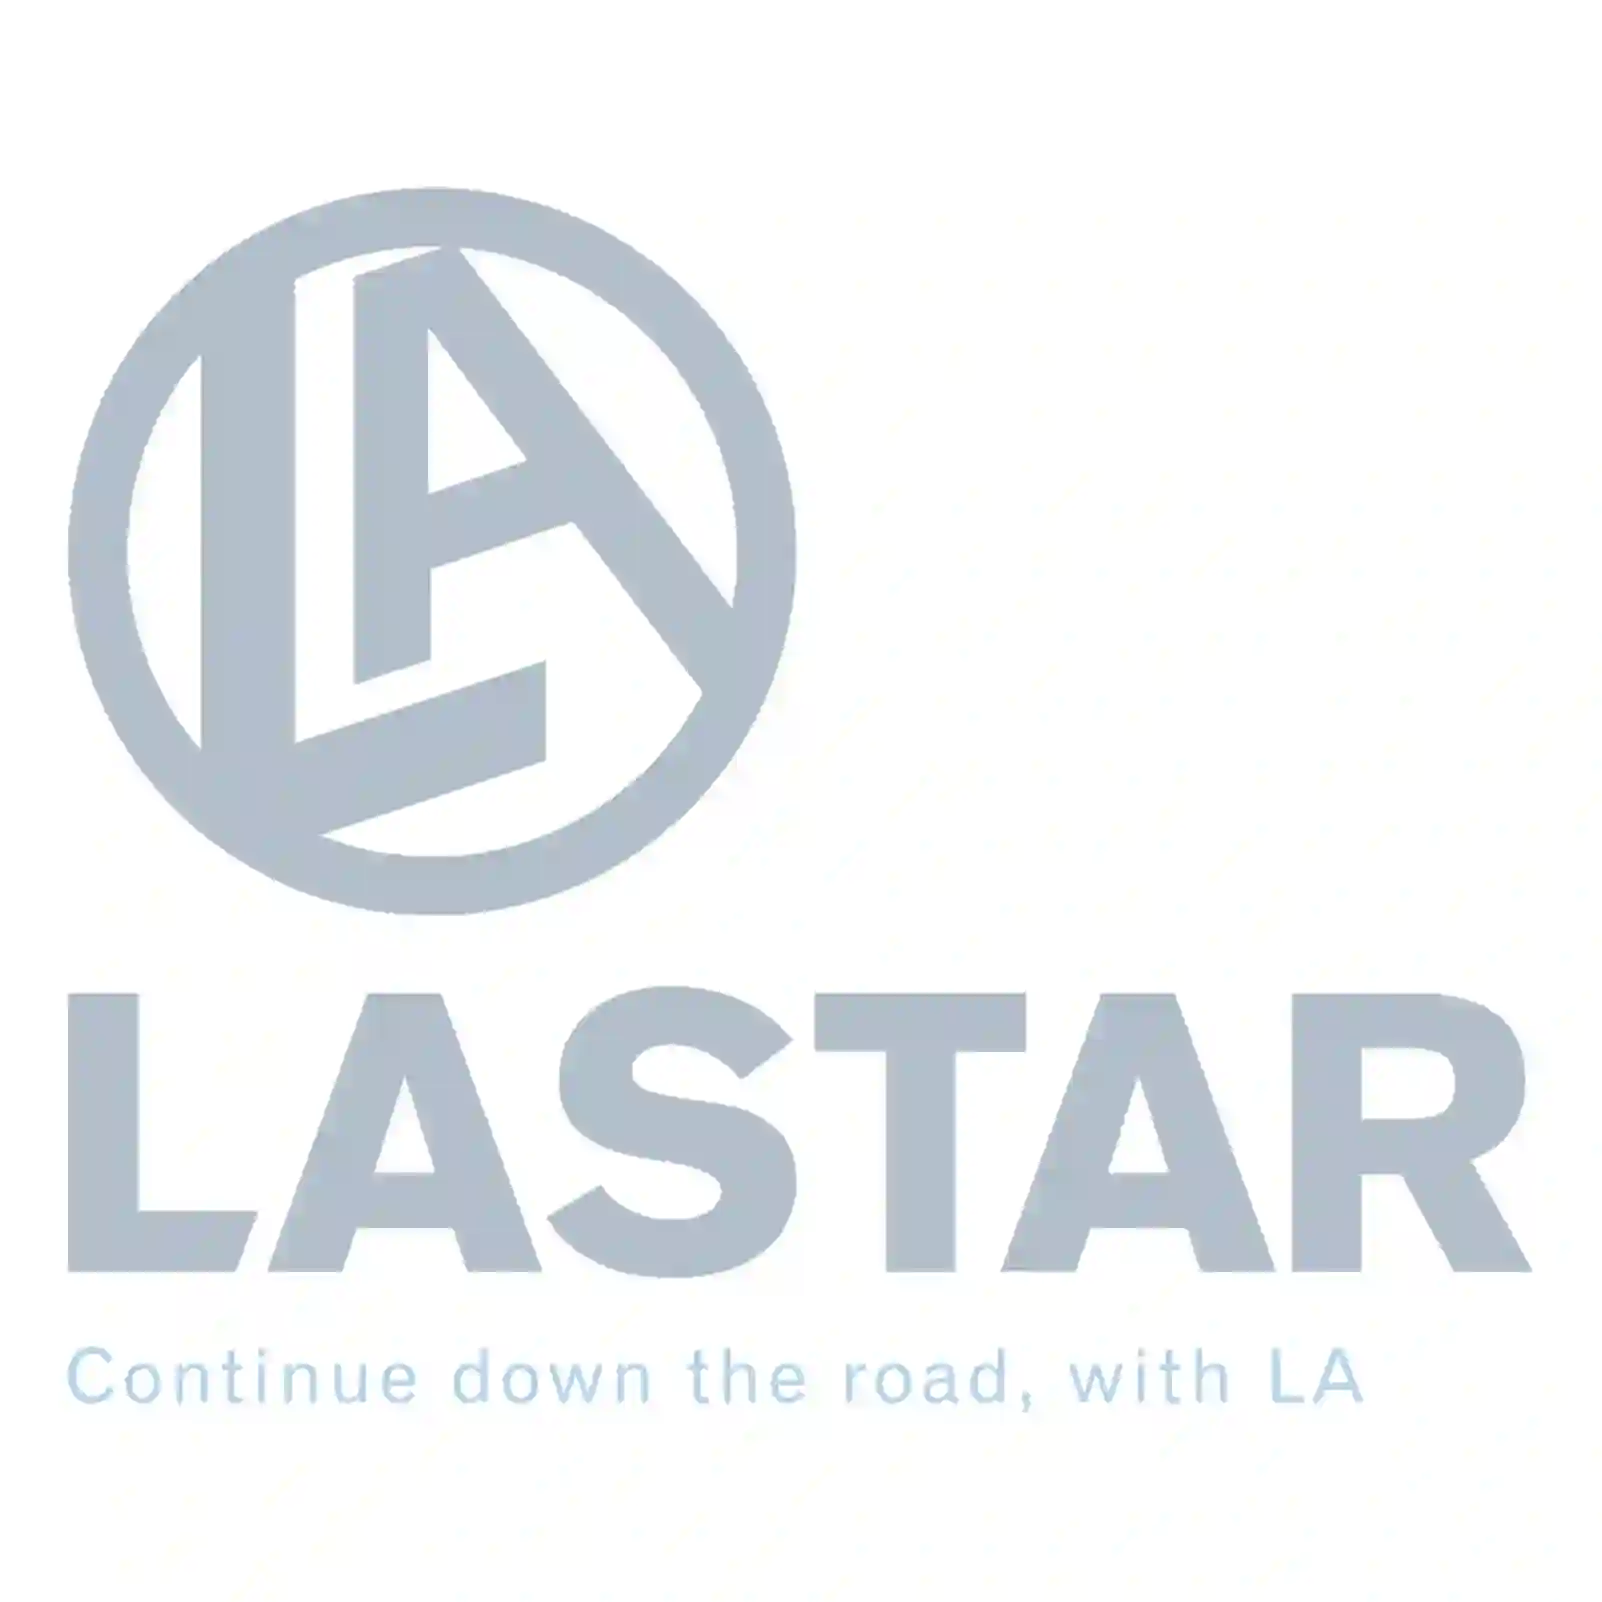  Cover plate, radiator, lower || Lastar Spare Part | Truck Spare Parts, Auotomotive Spare Parts